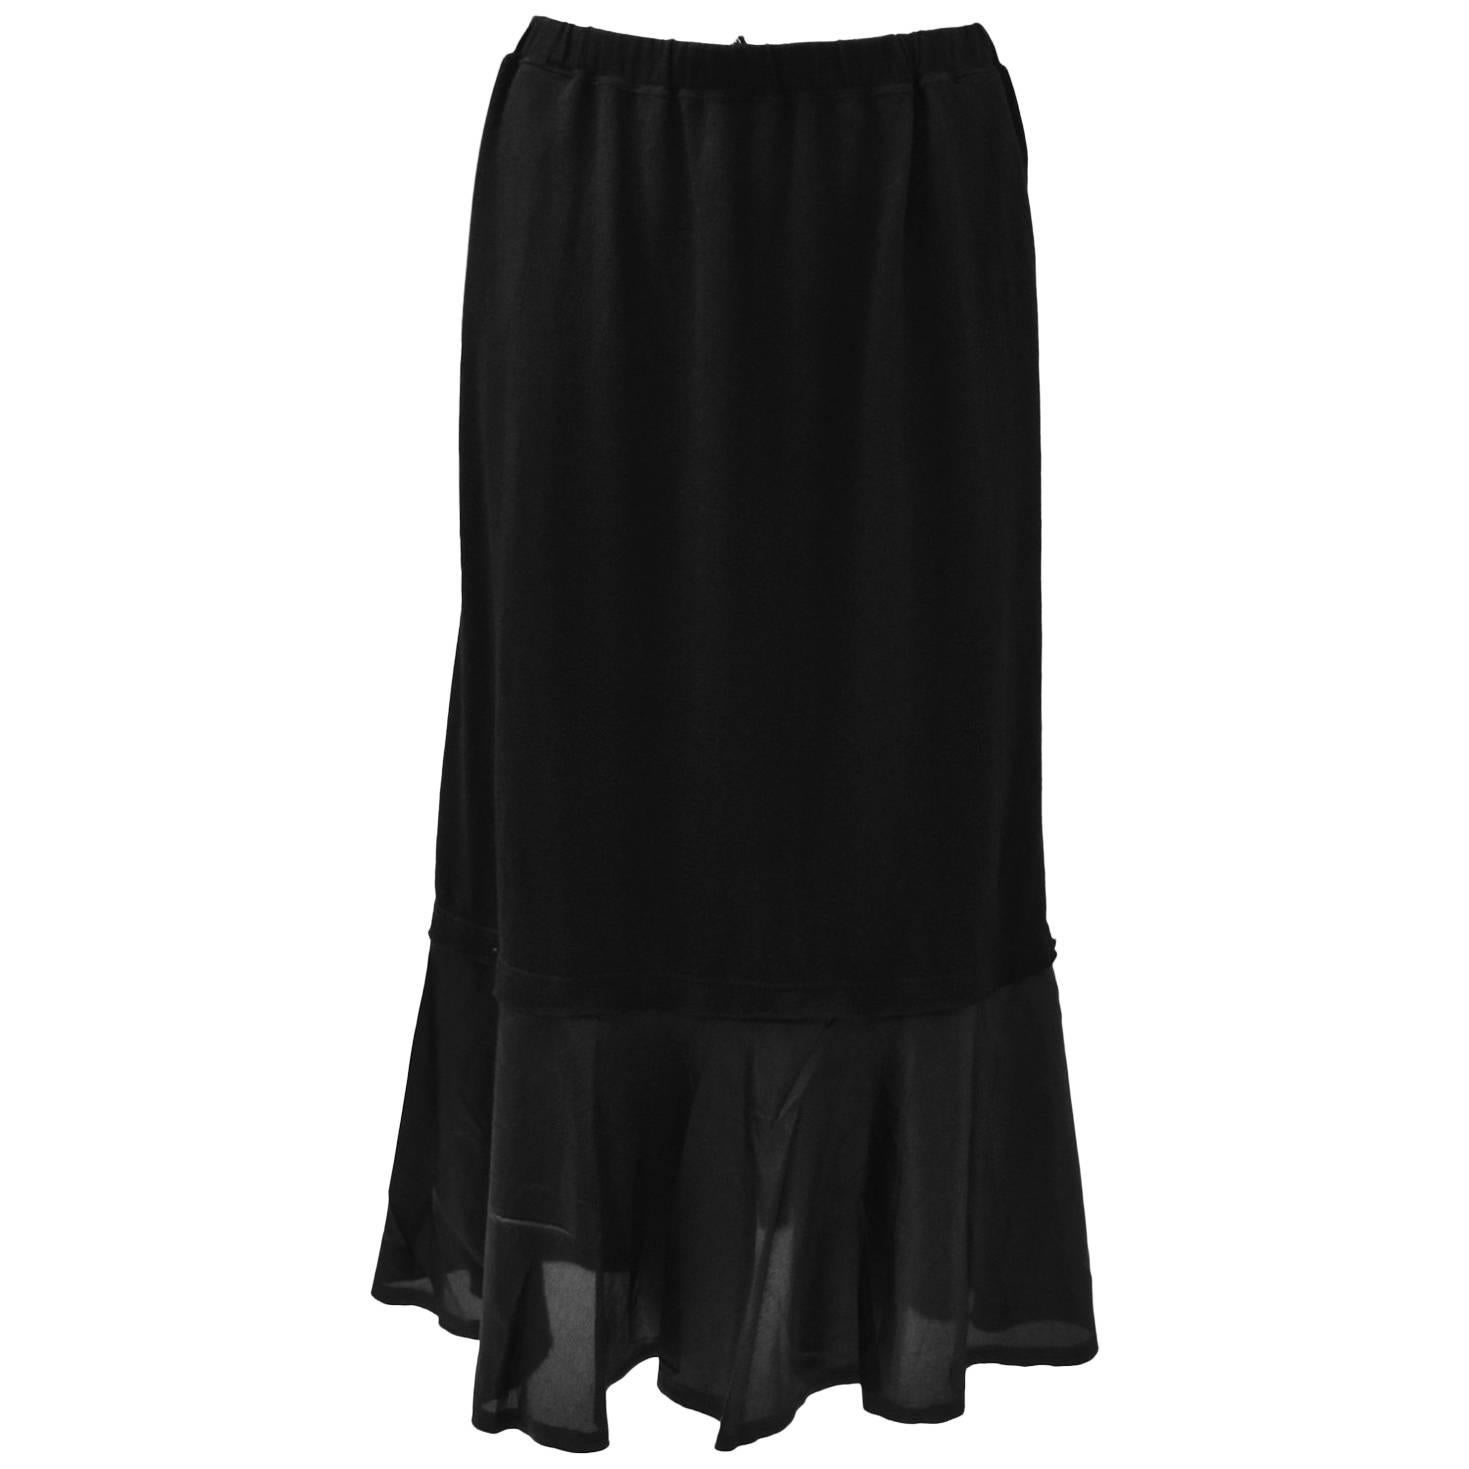  Comme des Garcons Black Wool and Rayon Contrast Hem Skirt  For Sale